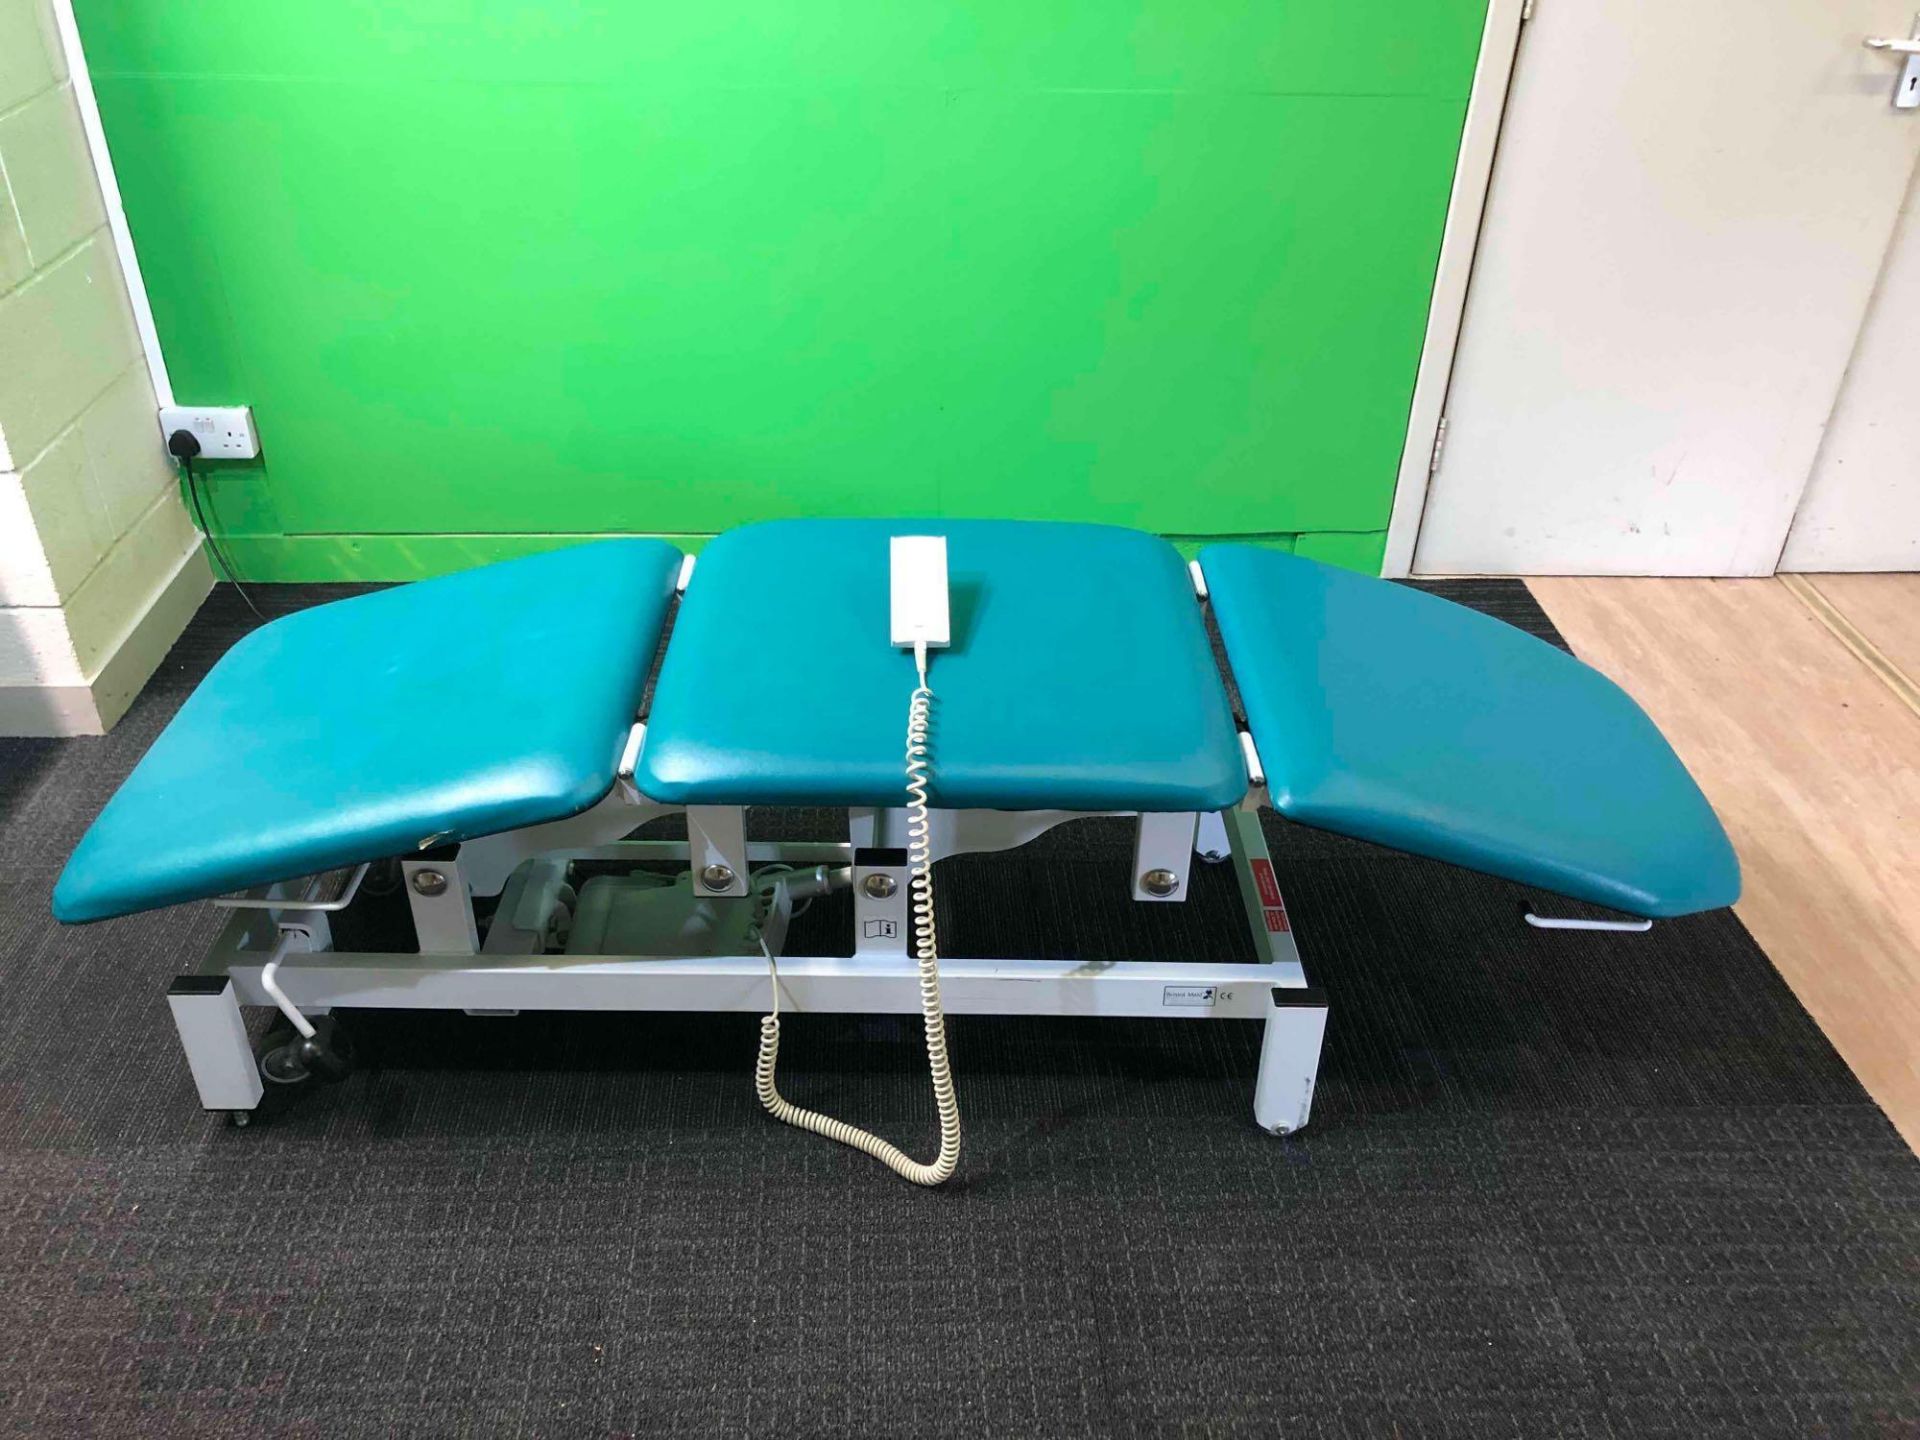 Bristol Maid (Hospital M-Craft) ECO 35 Patient Examination Couch - 3 Section - Image 2 of 2